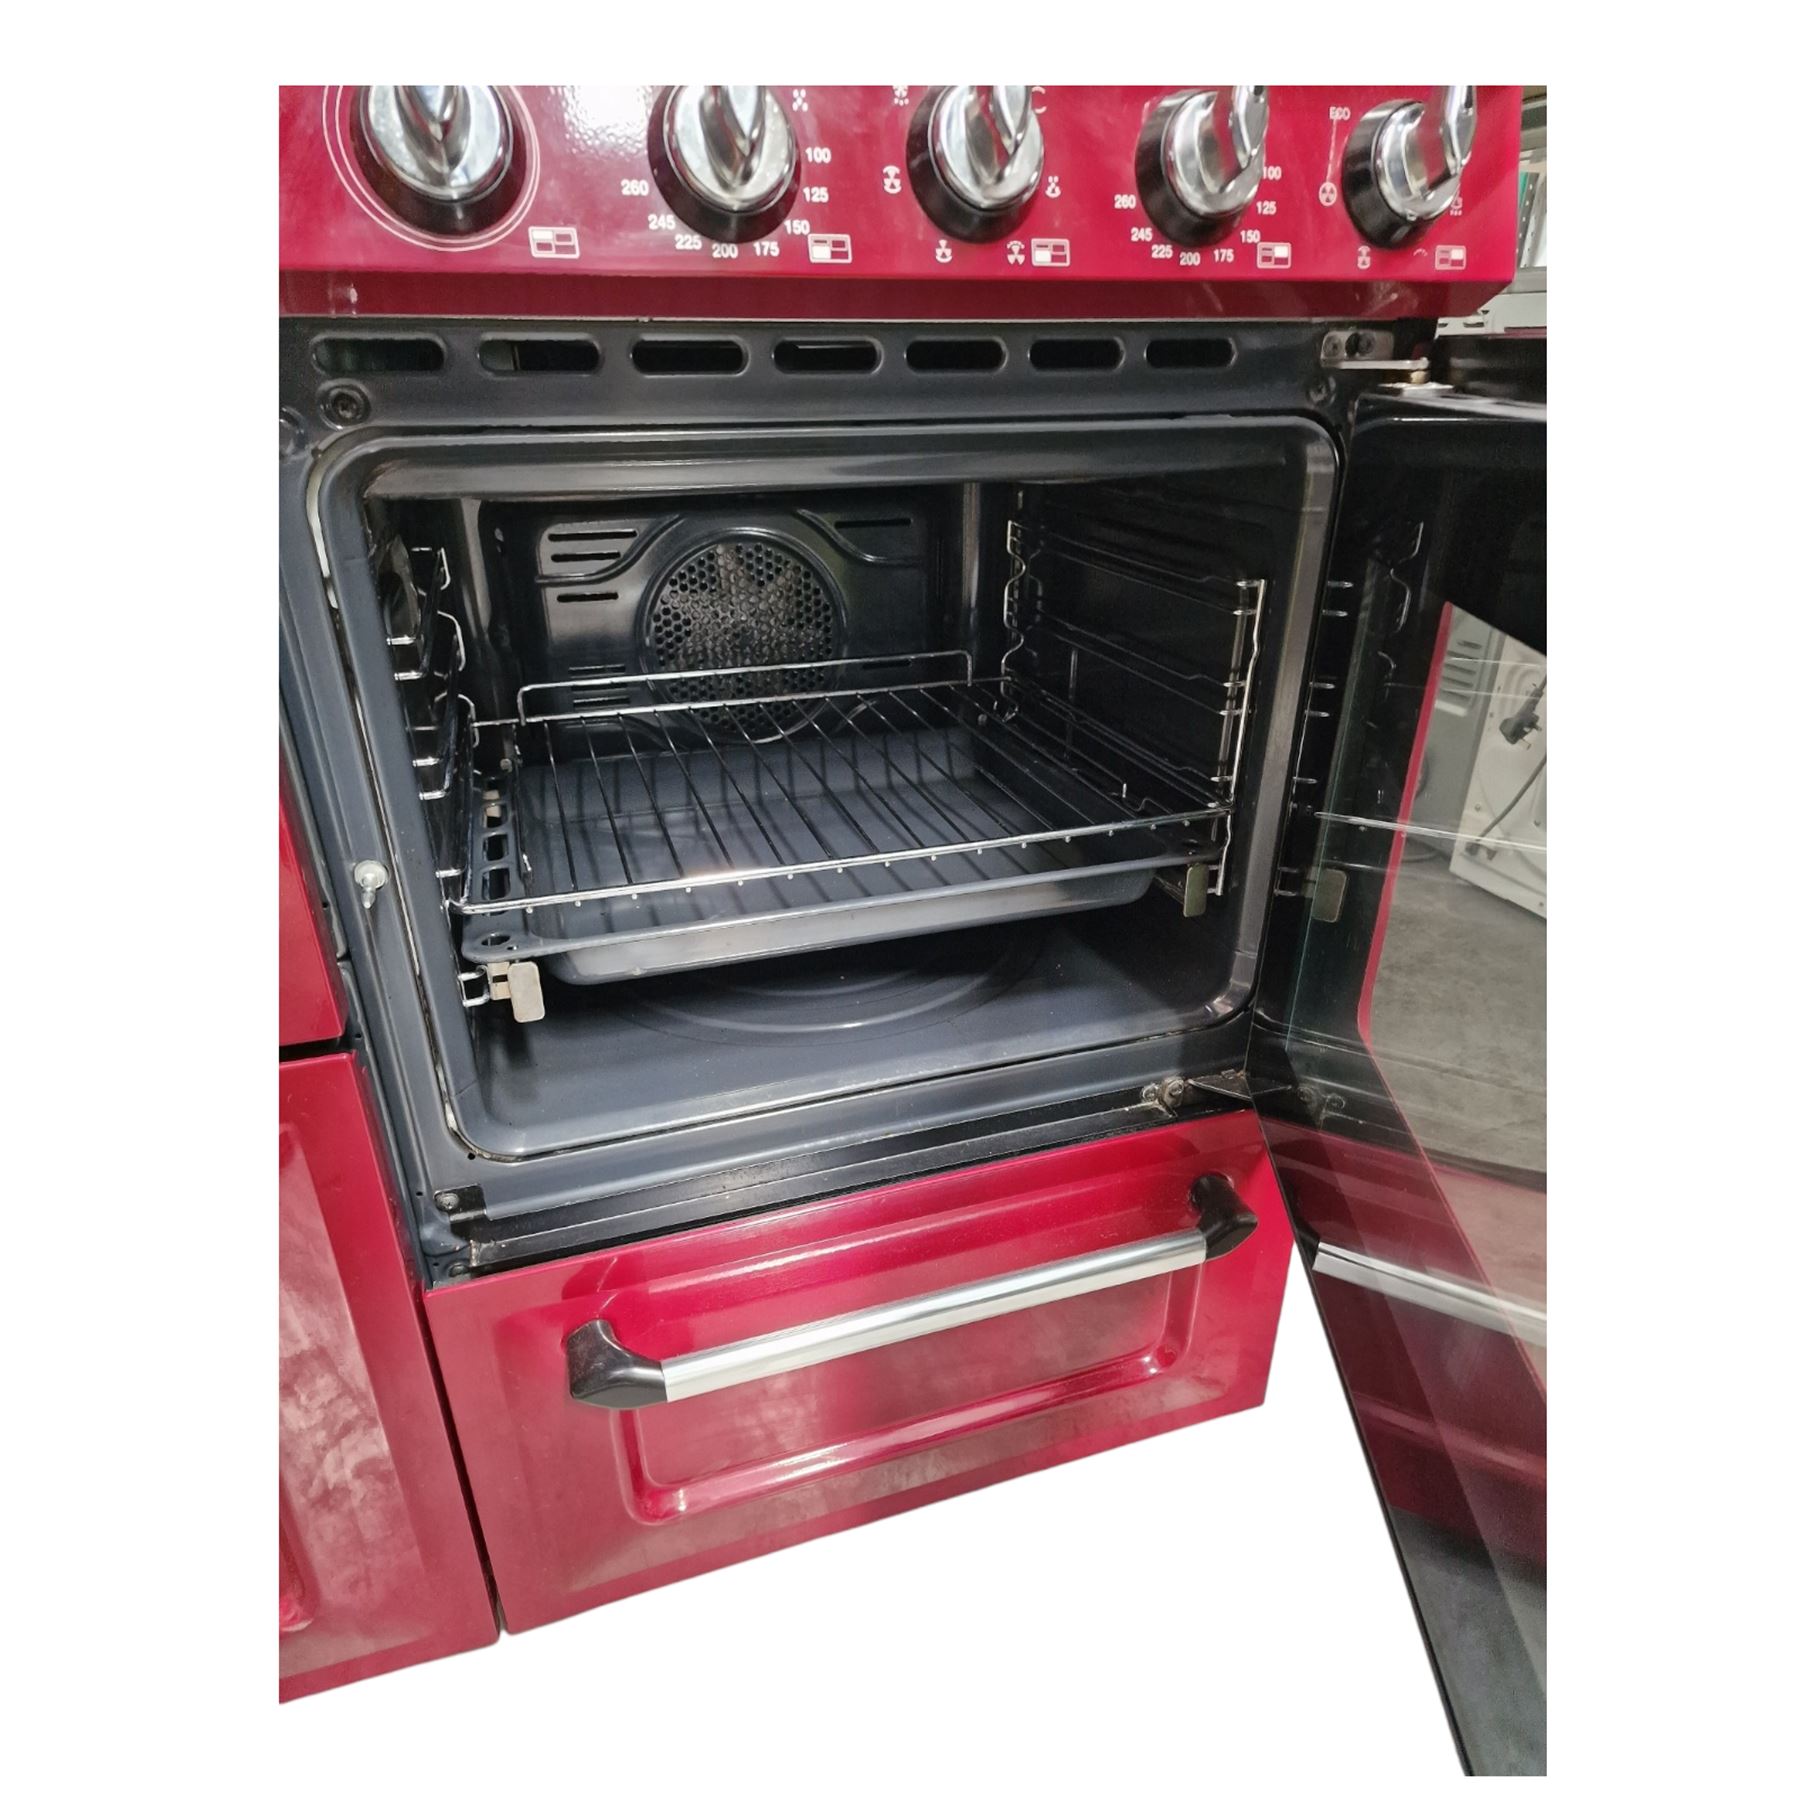 Smeg TR4110IRW Five ring induction cooker in dark red with grill and double ovens - Image 6 of 8